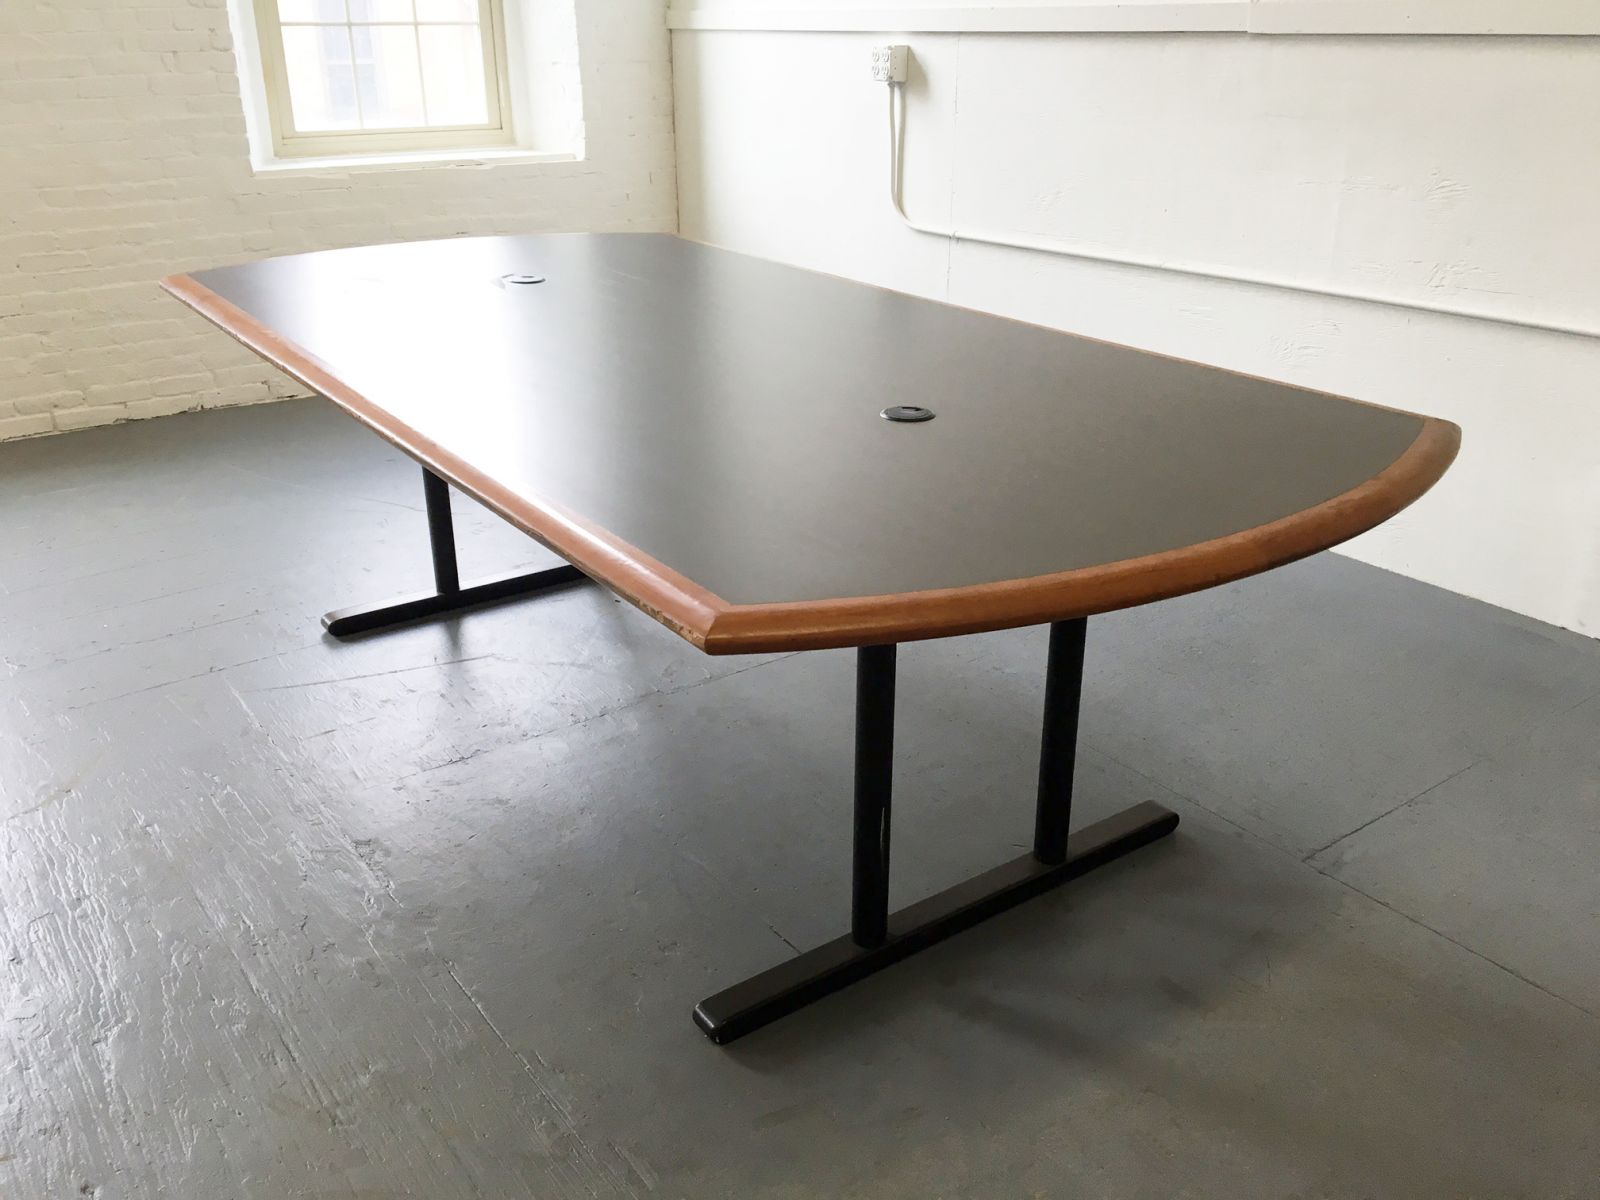 T9535C - 8' x 4' Laminate/Wood Conference Table